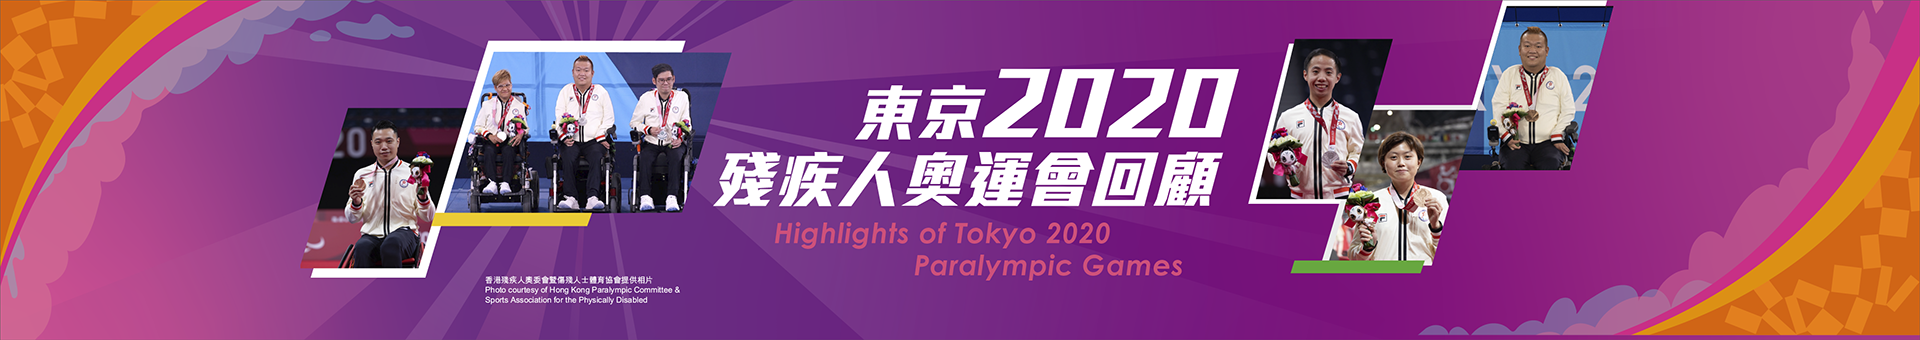 Highlights of Tokyo 2020 Paralympic Games